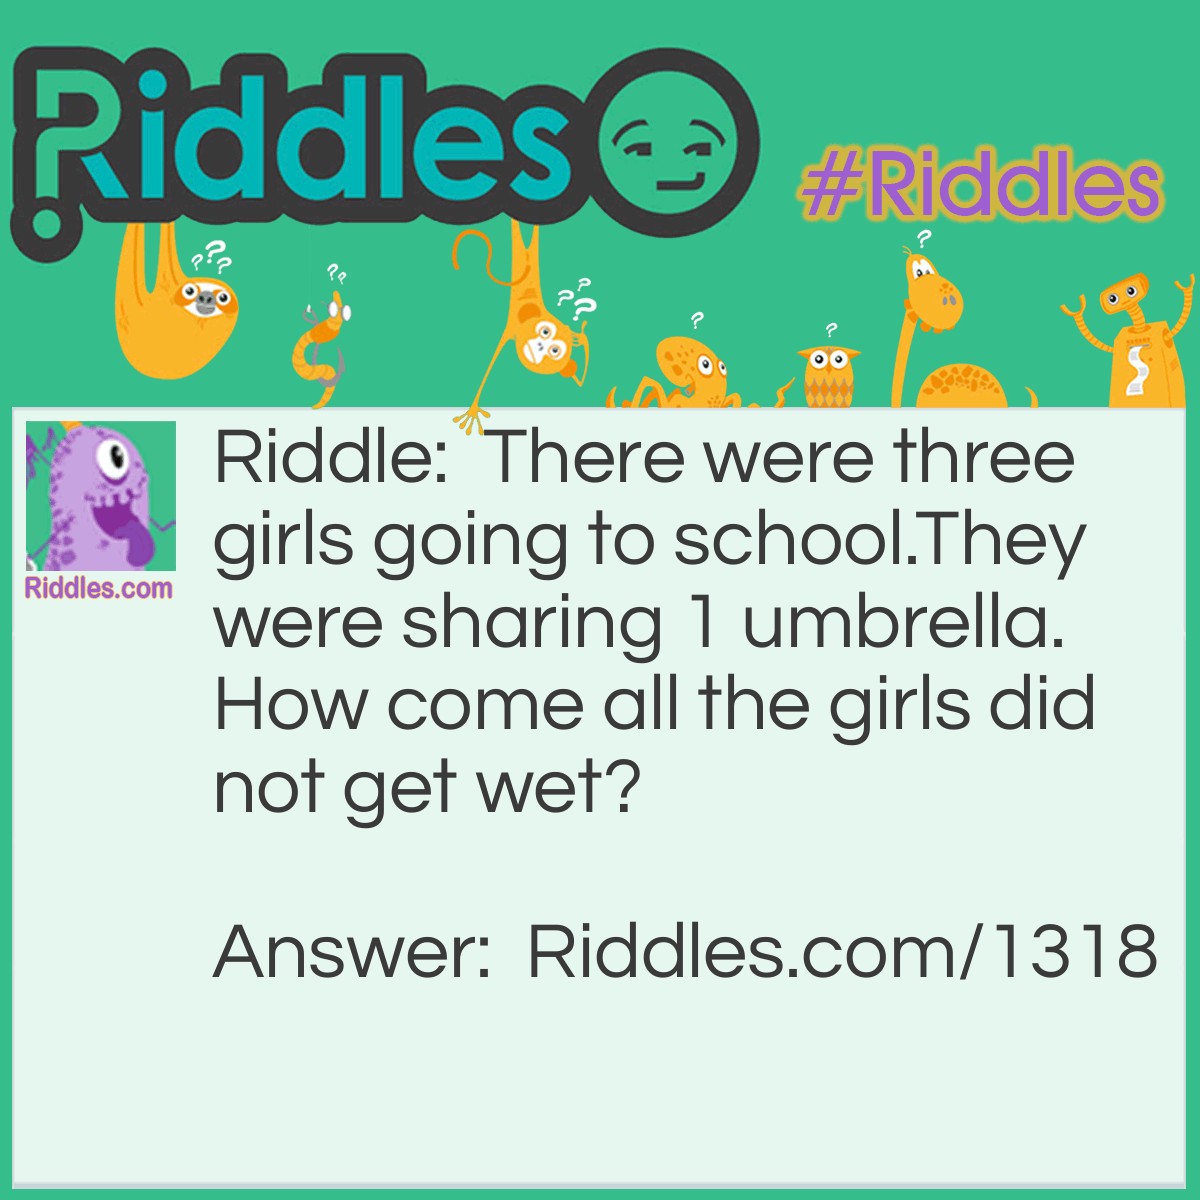 Riddle: There were three girls going to school. They were sharing 1 umbrella. How come all the girls did not get wet? Answer: Because it was not raining!!!